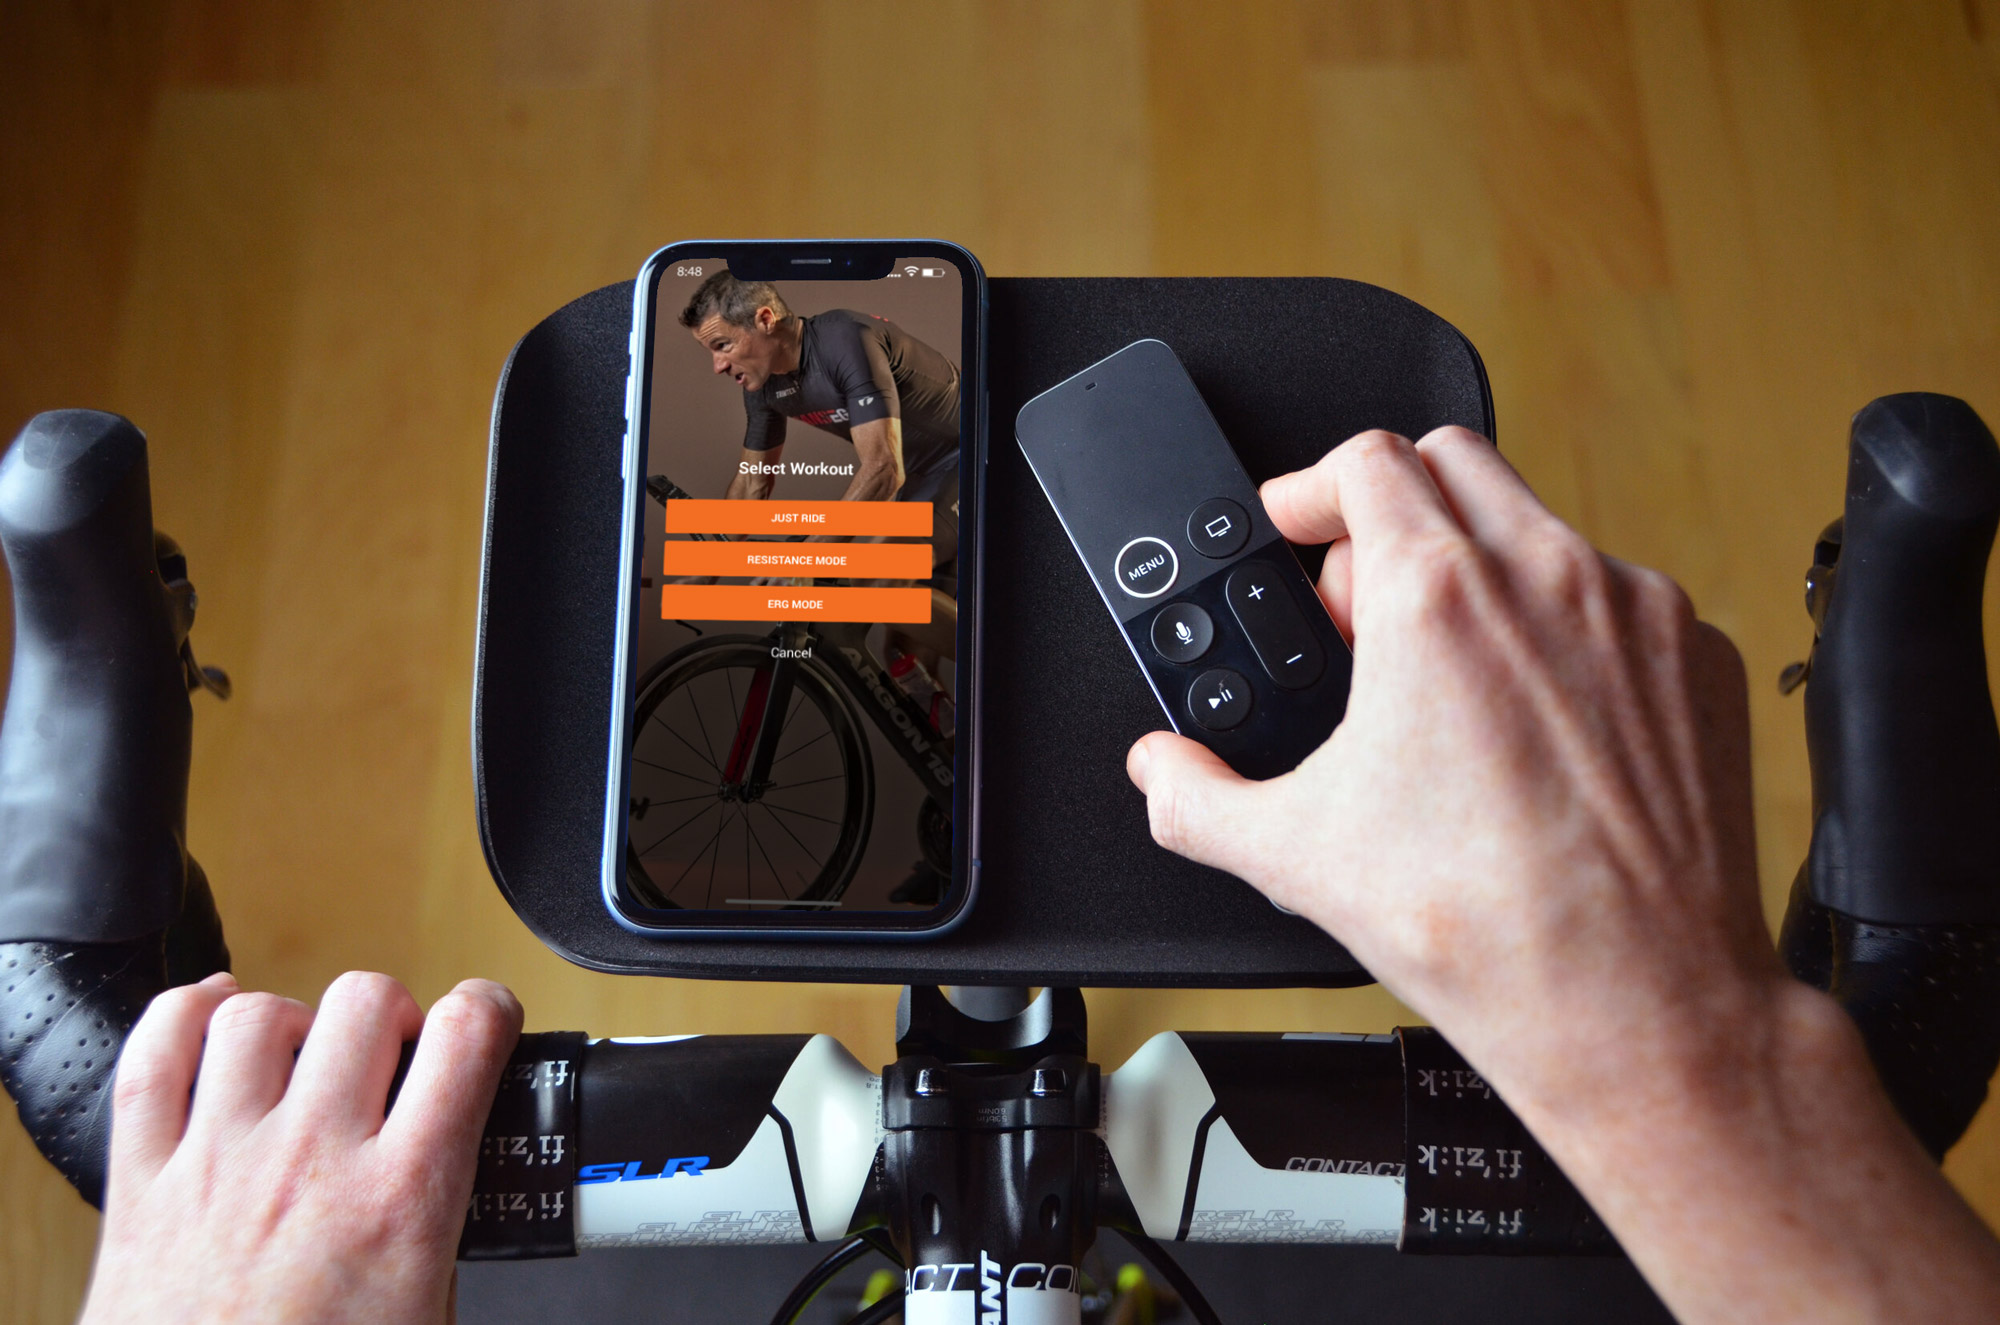 Jetblack Indoor Cycling Tray Remote And Phone Holder For Bike.jpg